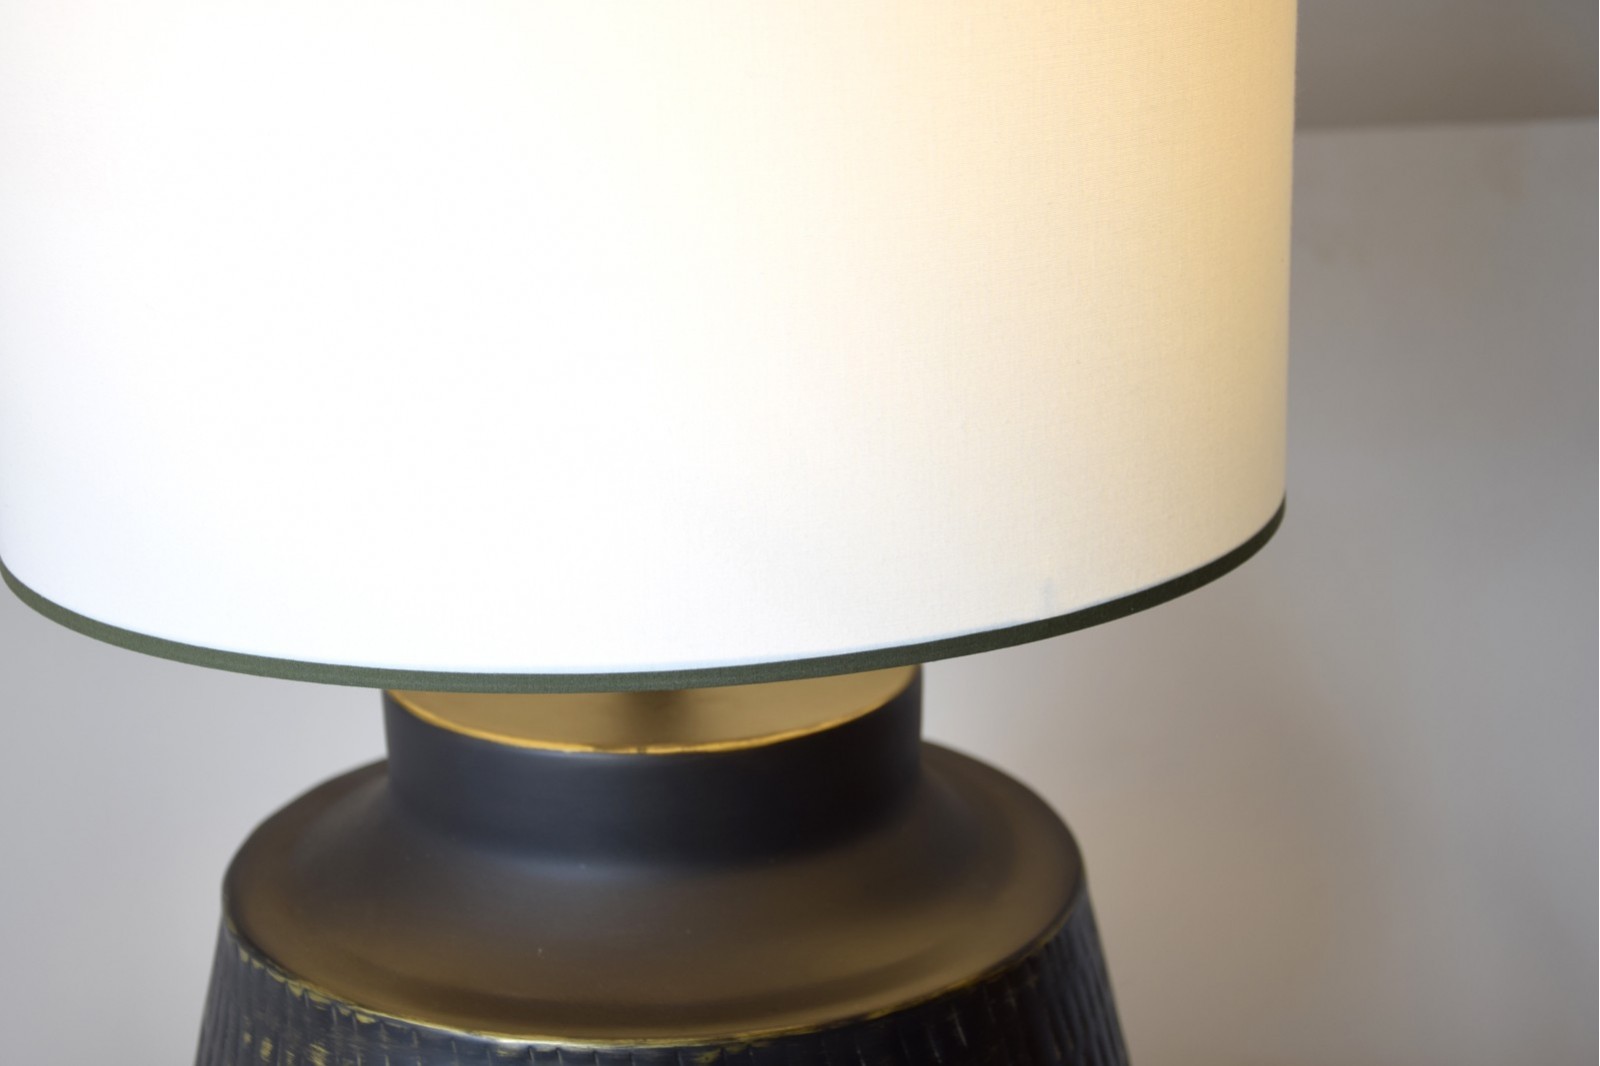 METAL TABLE LAMP N5 WITH SHADE